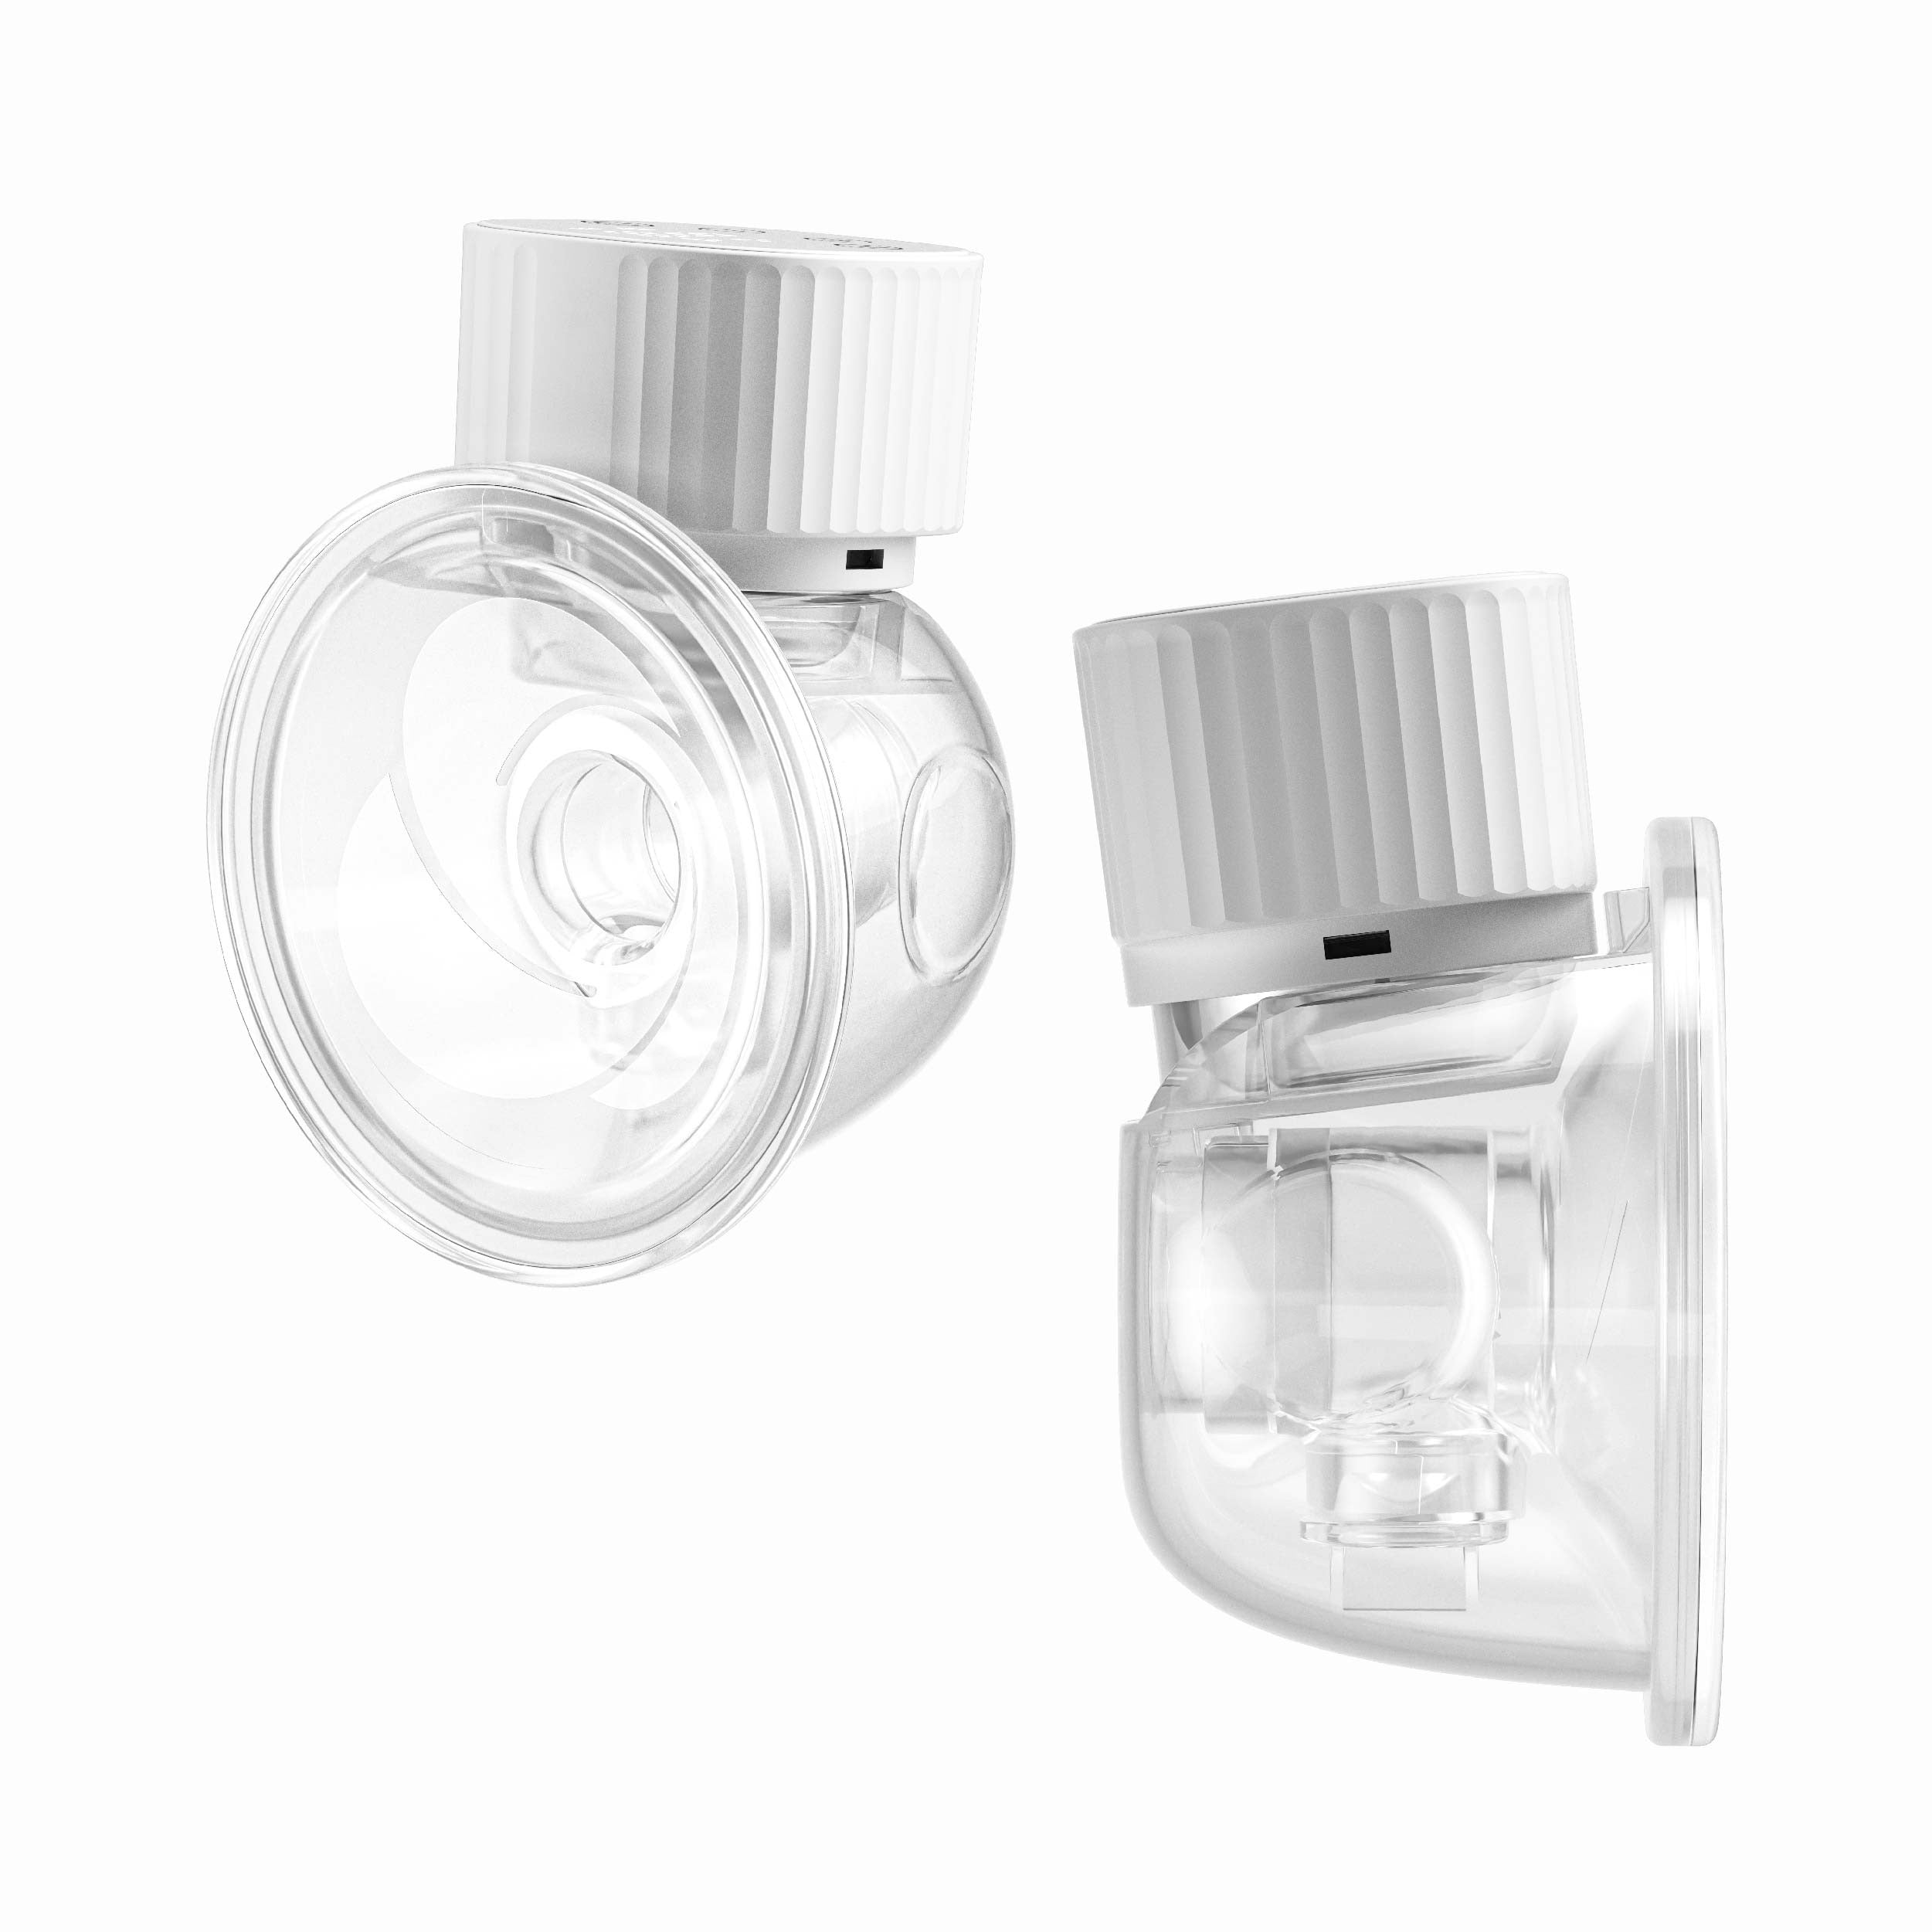 Lactivate ARIA Wearable Breast Pump - Duo Set - Tiny Tots Baby Store 